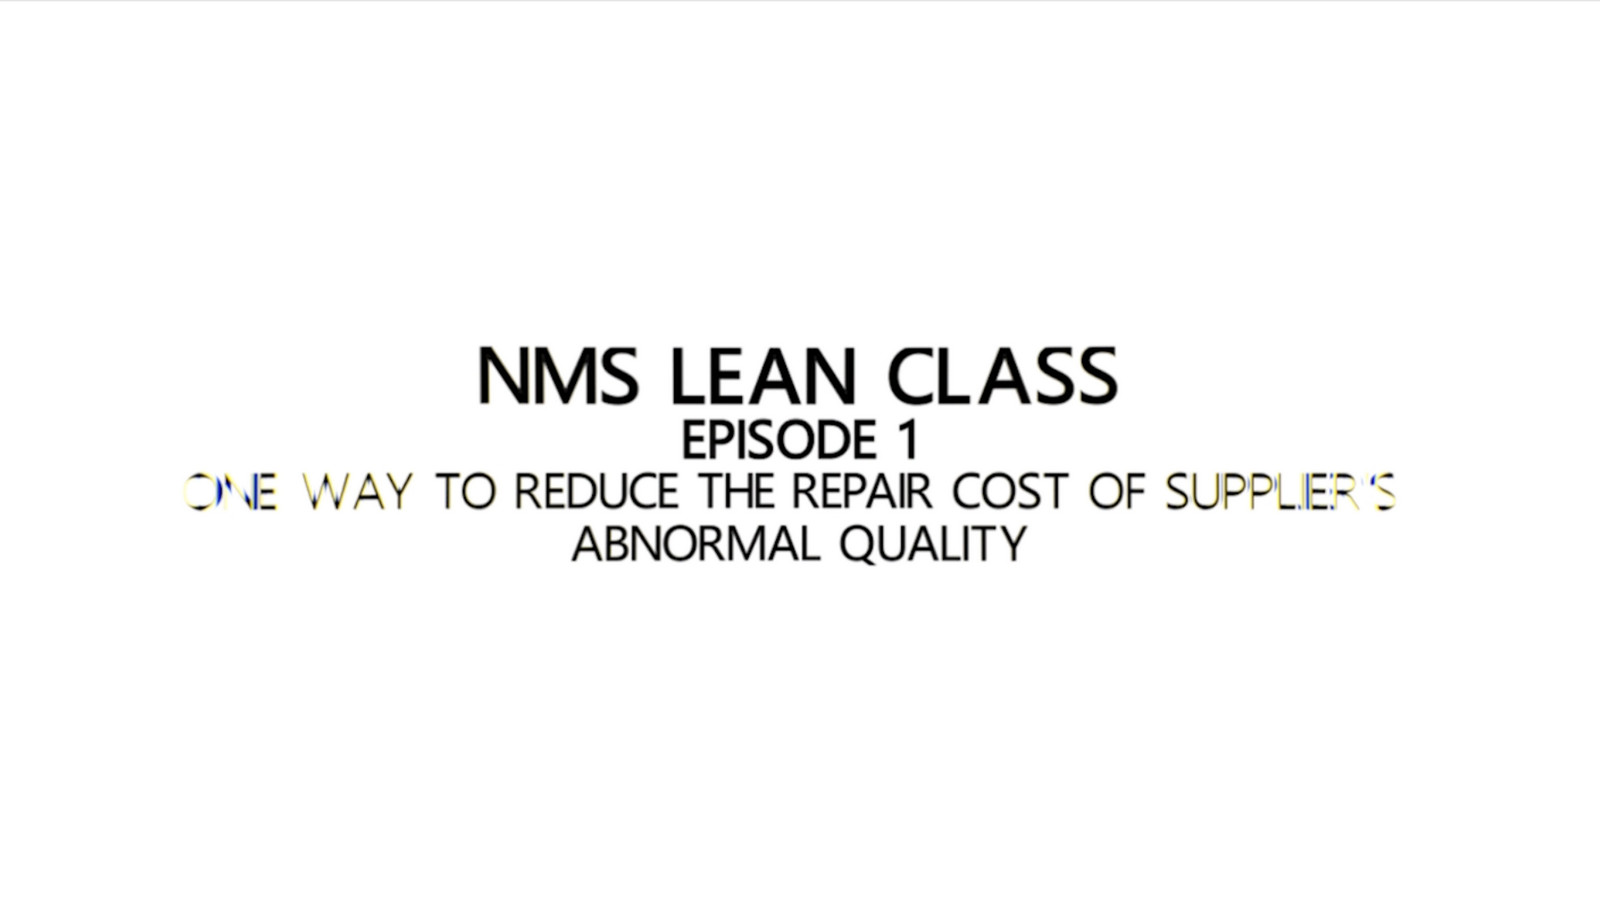 NMS Learn Class Episode 1 - One way to reduce the repair cost of supplier's abnormal quality